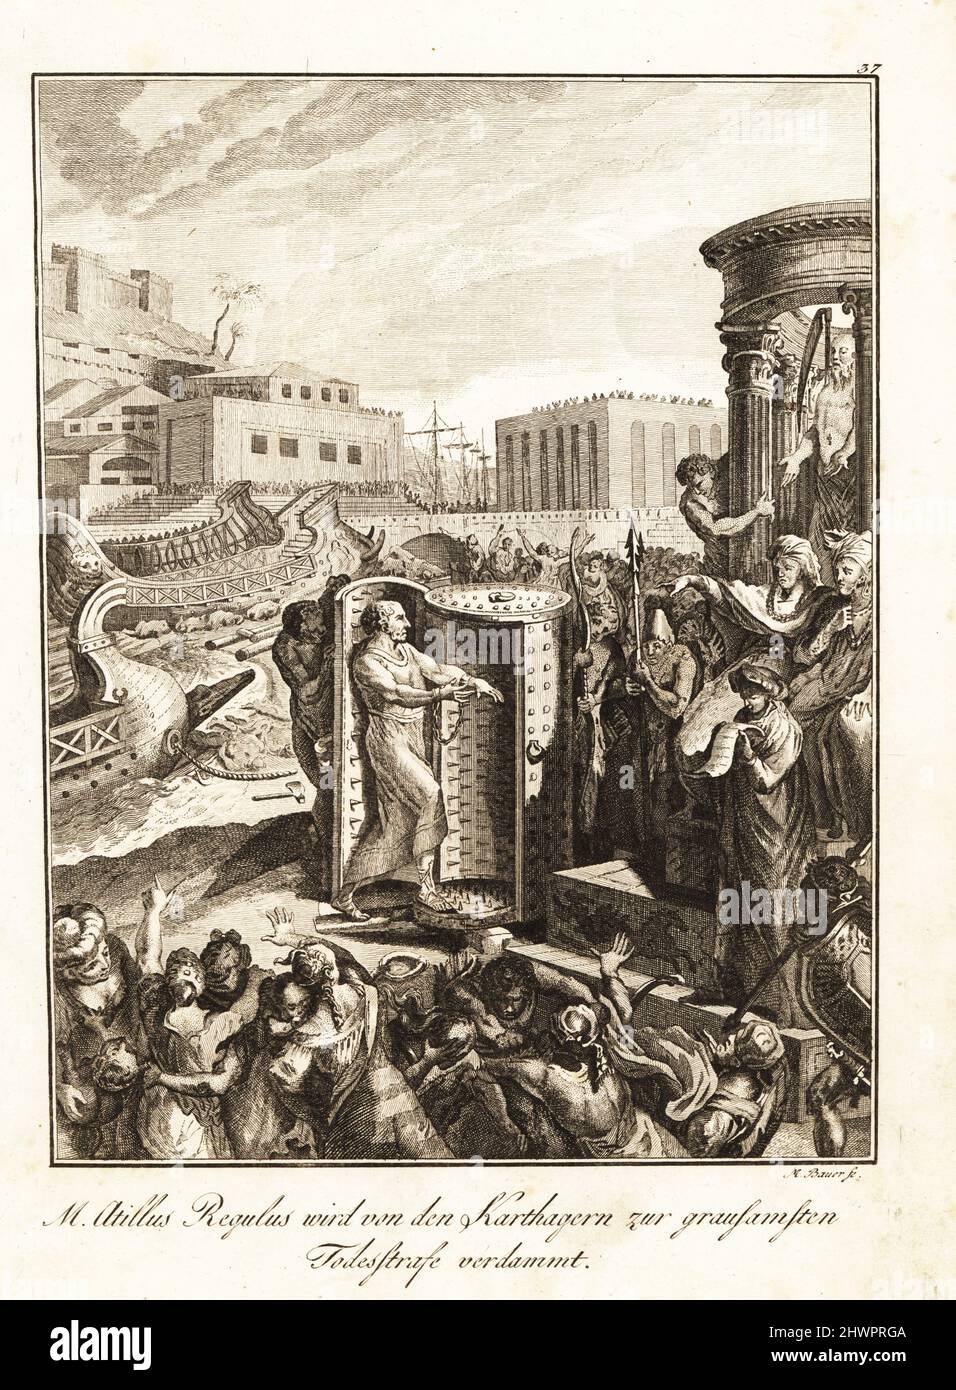 Marcus Atilius Regulus, Roman statesman, general and consul, tortured to death by the Carthaginians, c. 250 BC. He was forced into a box spiked with nails, an early Iron Maiden. Regulus condamne aux plus affreux supplices. Copperplate engraving by M. Bauer after a design by Gabriel de St. Aubin from Professor Joseph Rudolf Zappe’s Gemalde aus der romischen Geschichte, Pictures of Roman History, Joseph Schalbacher, Vienna, 1800. German edition of Abbe Claude Francois Xavier Millot’s Abrege de l’Histoire Romaine. Stock Photo